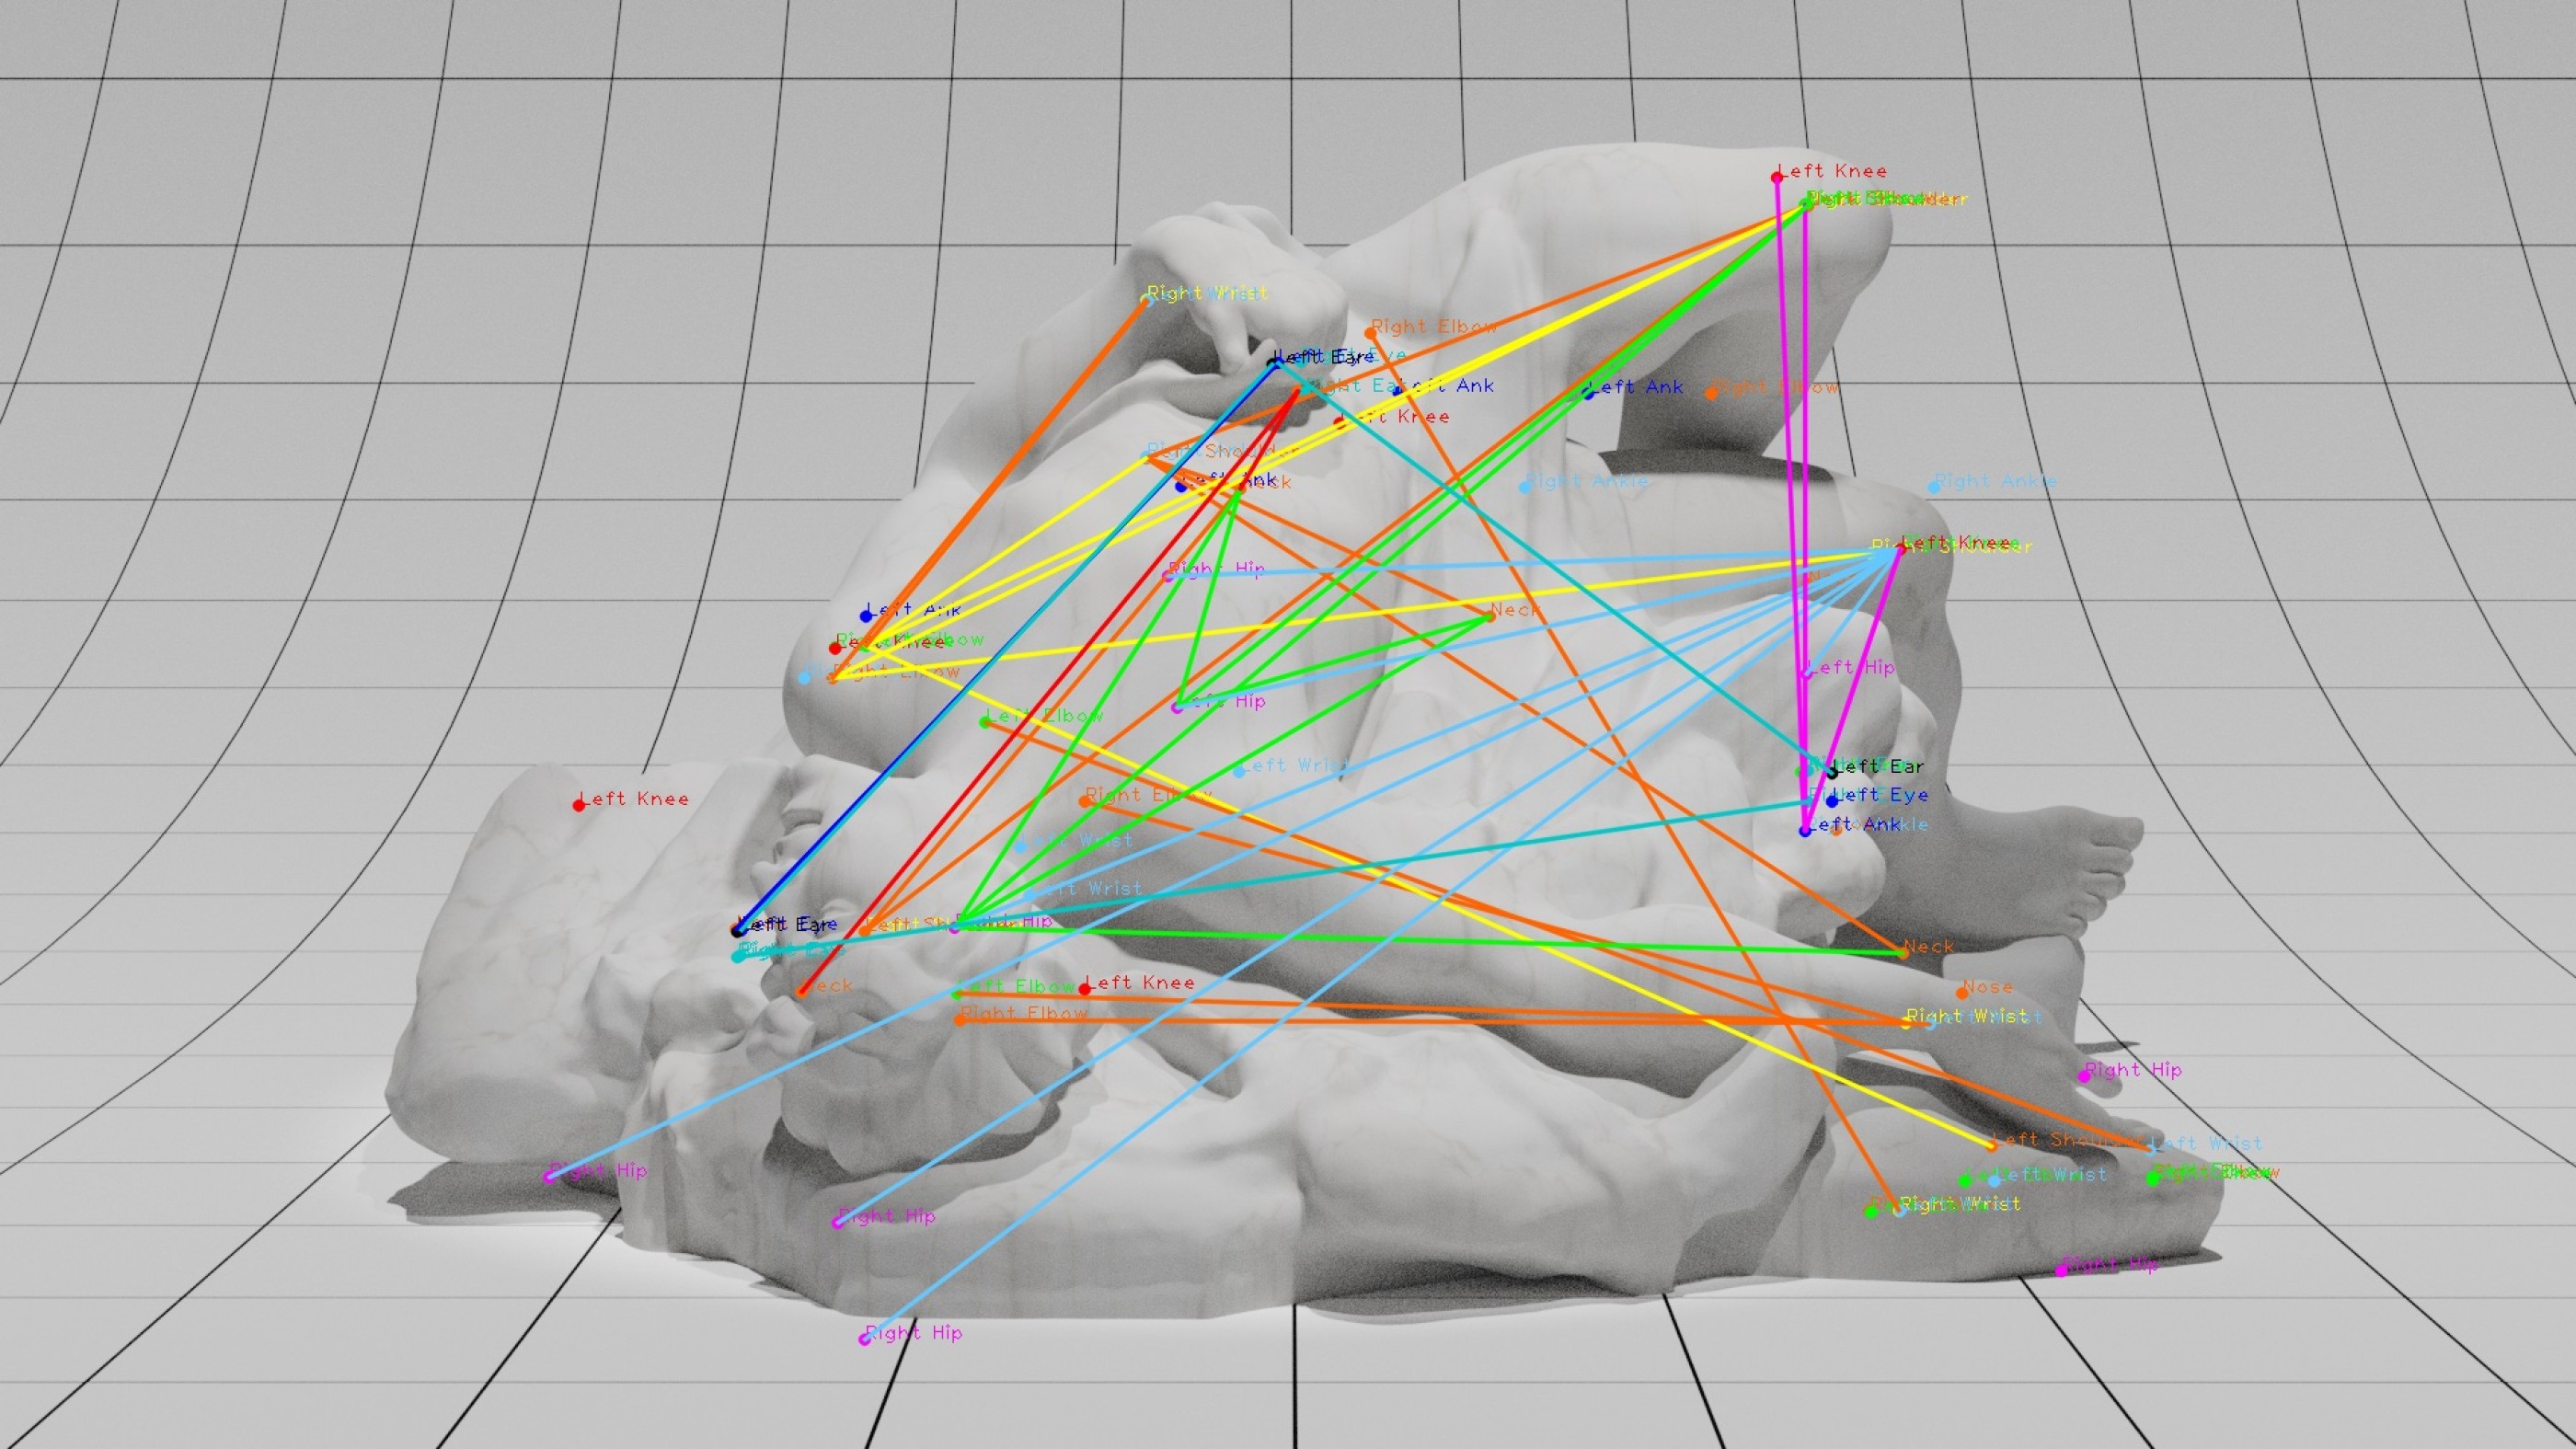 Figure 1: The Fall of Icarus with human pose detection keypoints. © Adam Harvey 2021. Based on a 3D model by Scan the World.